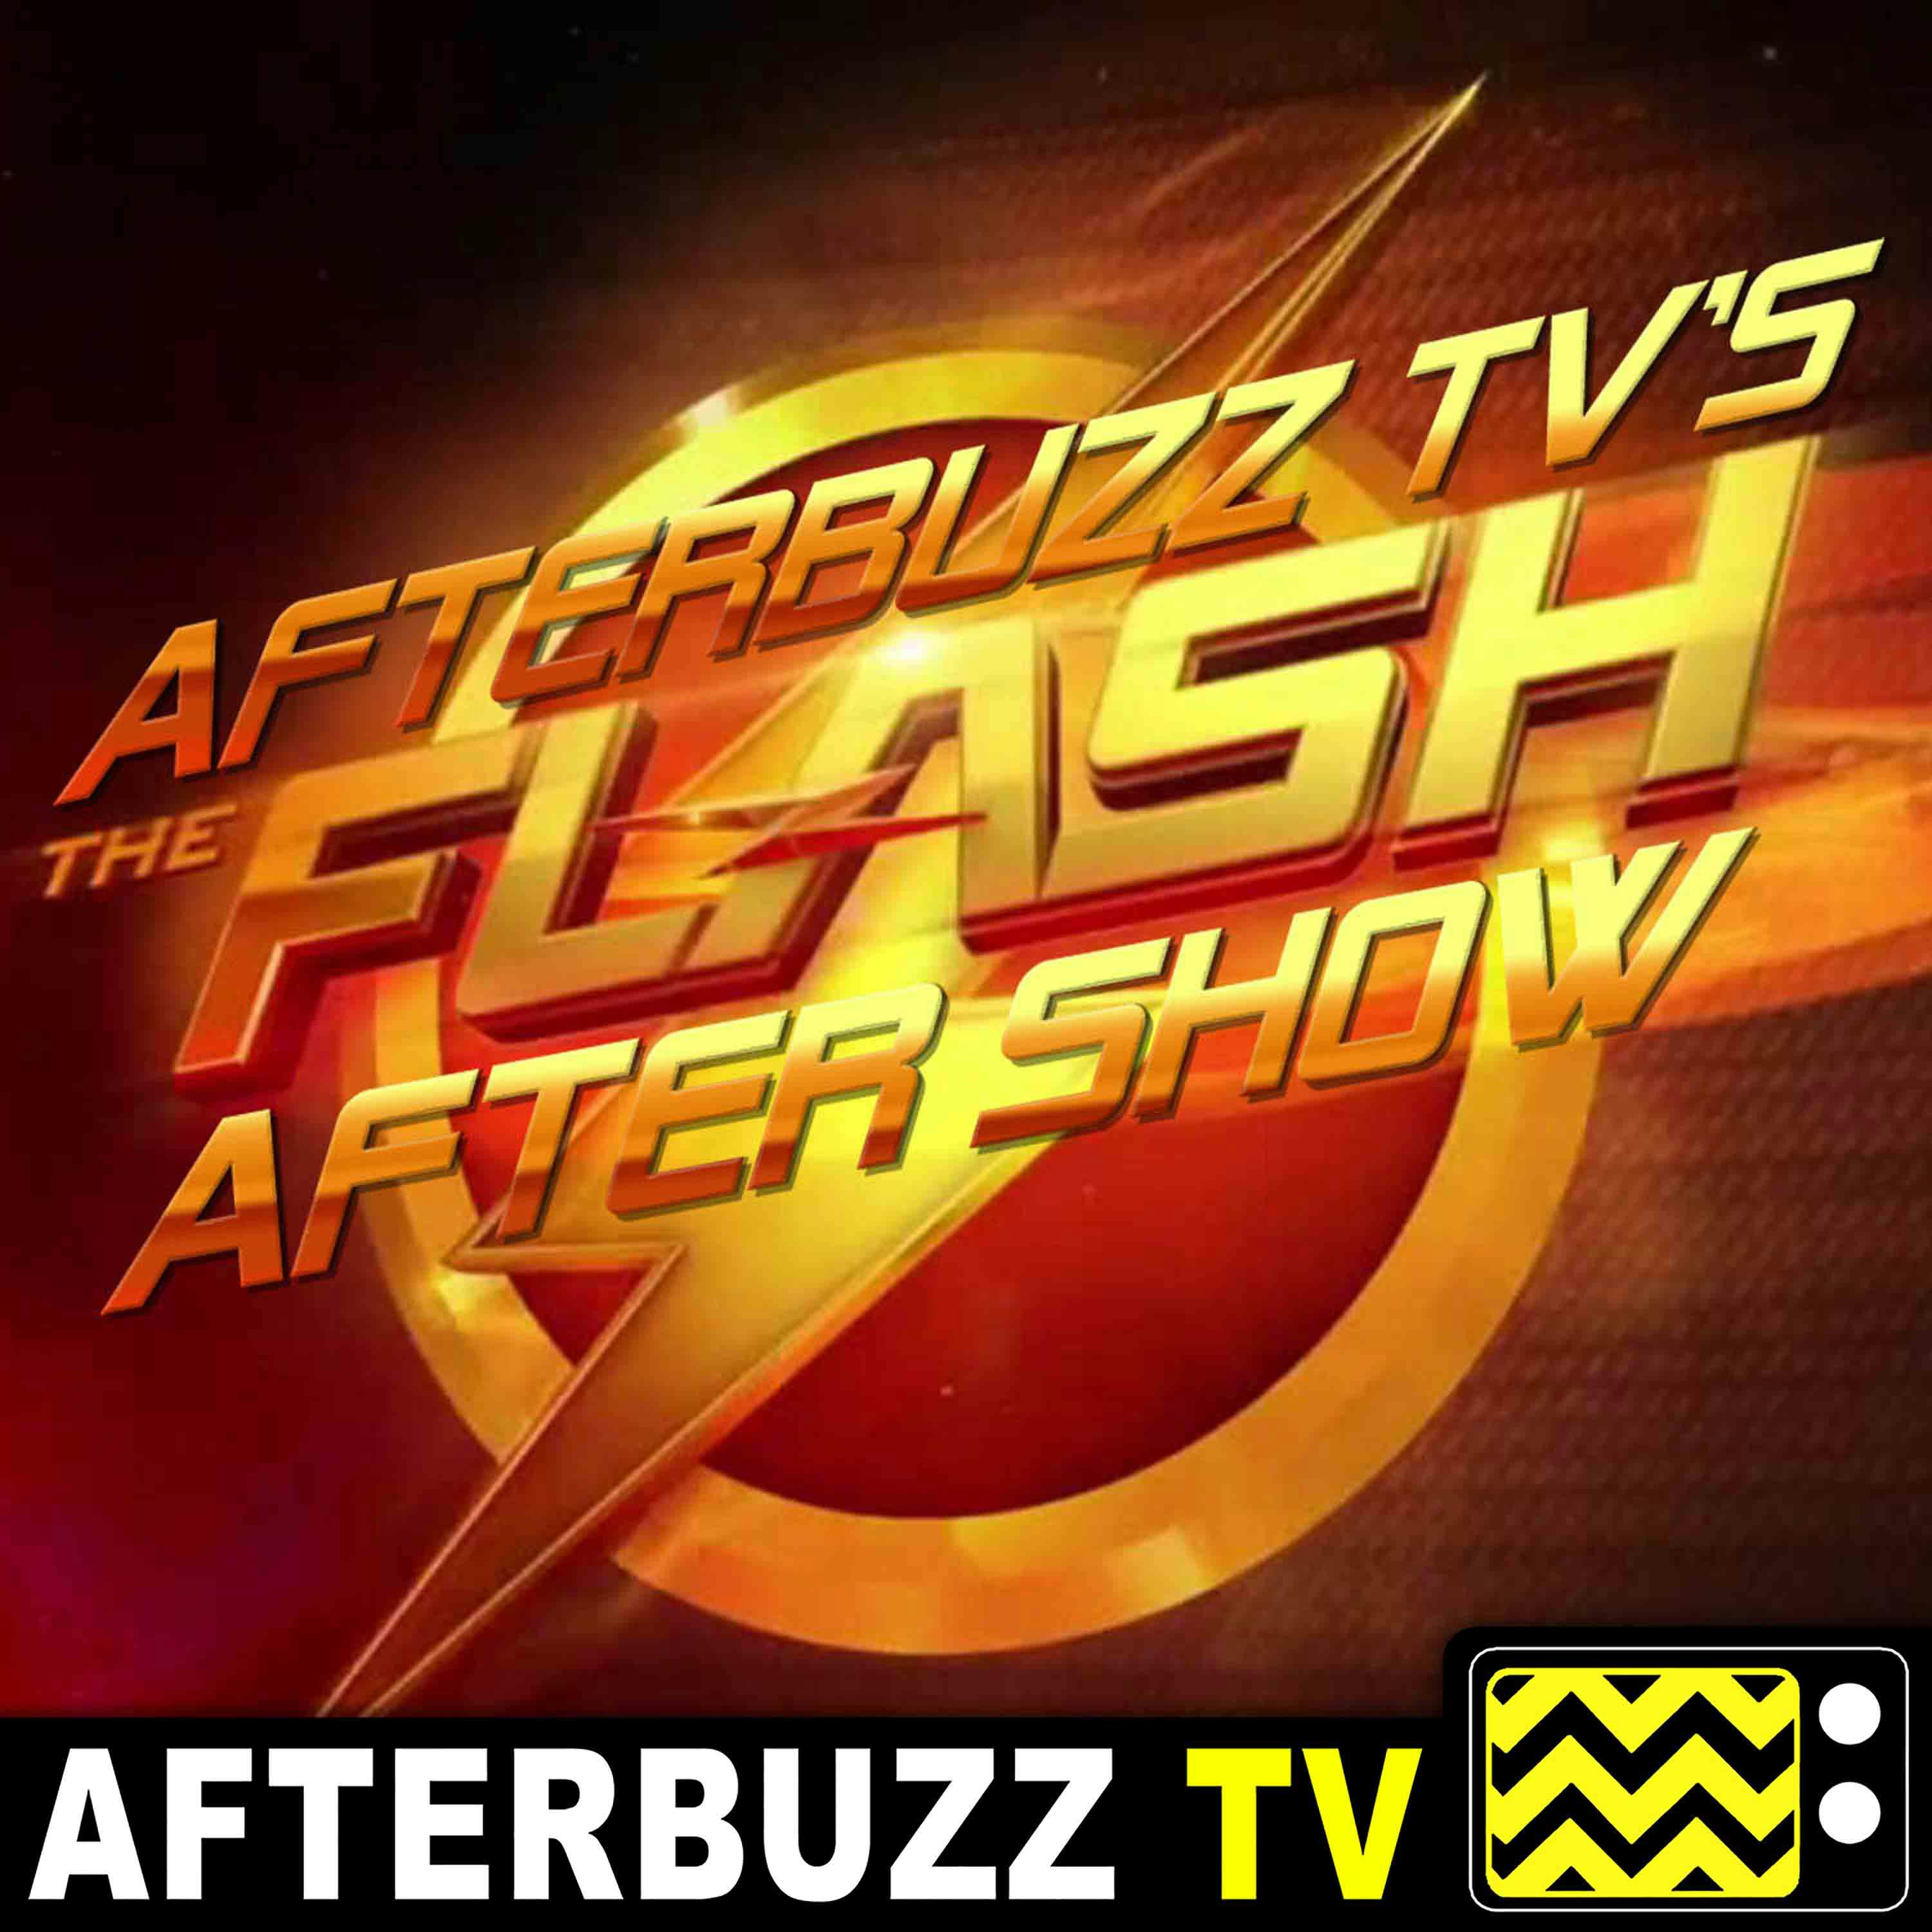 "Gone RogueThe Girl With the Red Lightning" Season 5 Episodes 20 & 21 'The Flash' Review